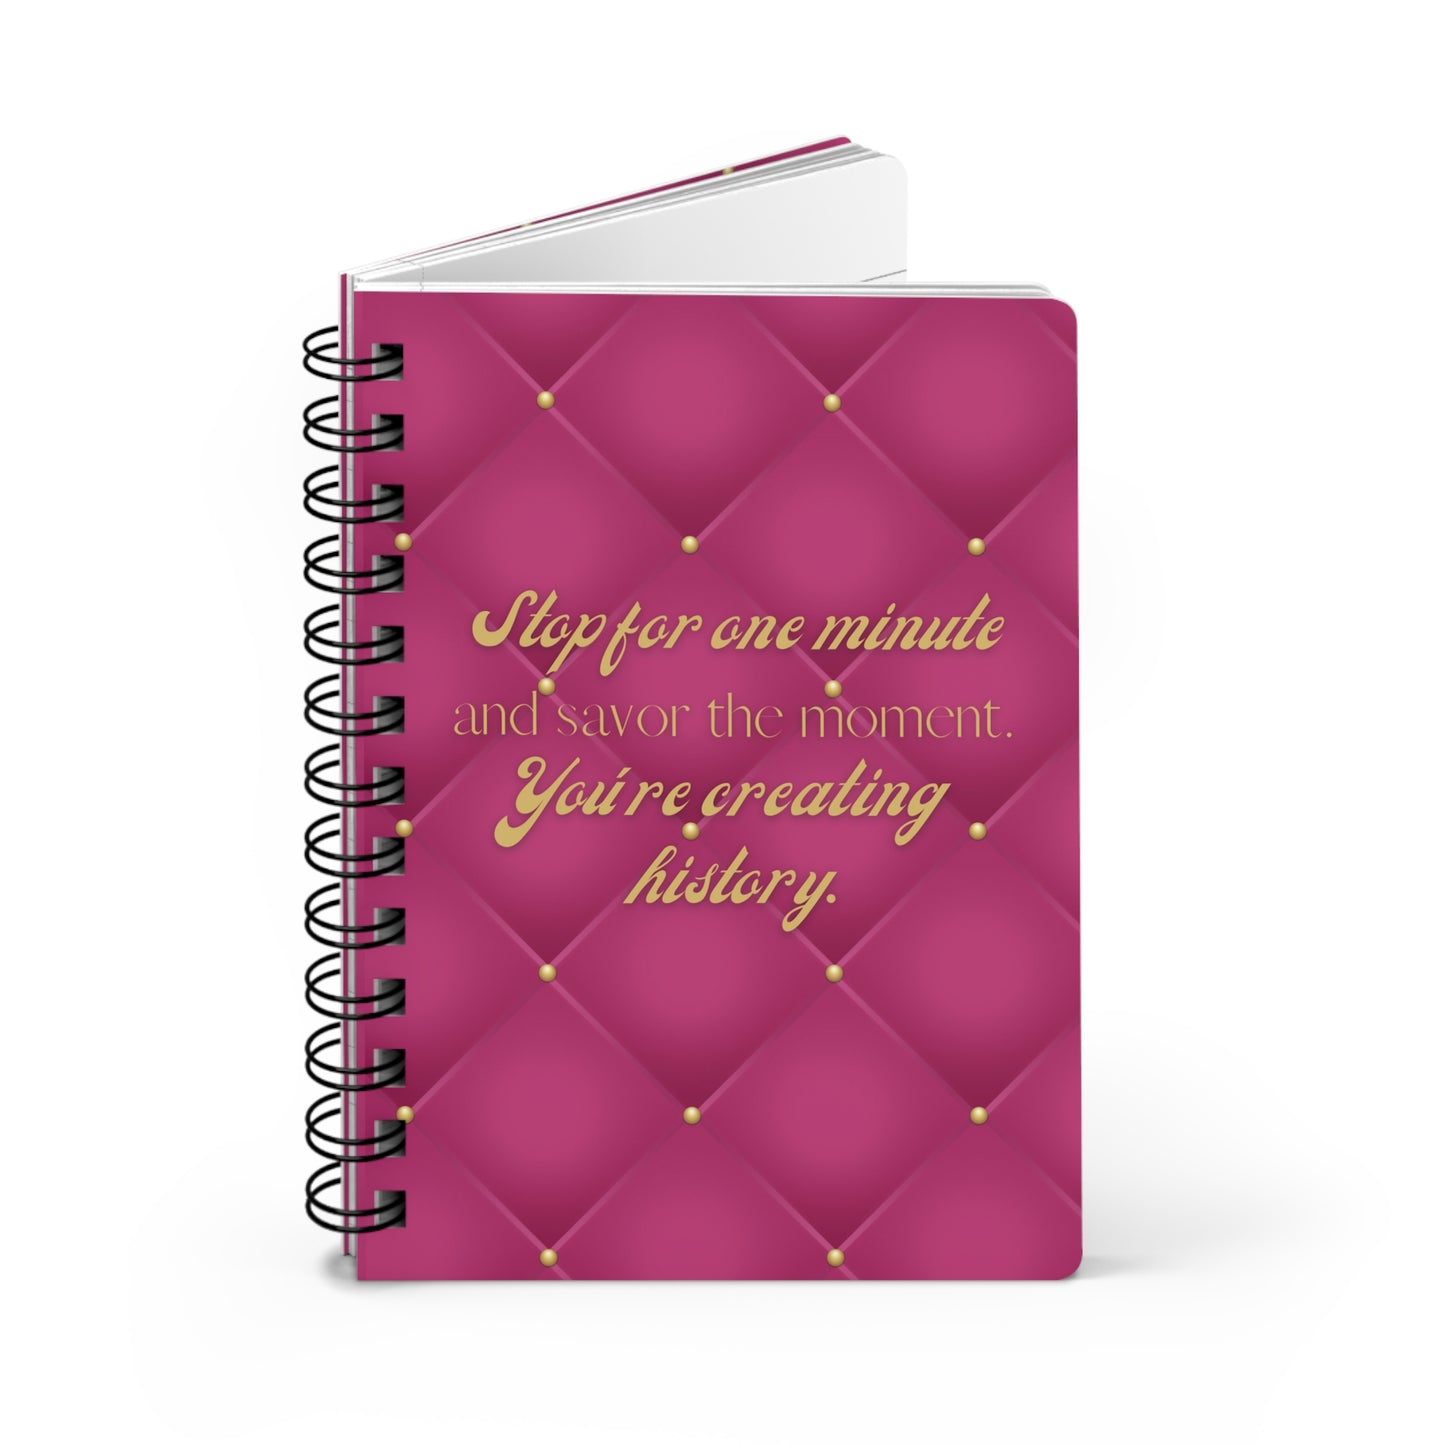 Stop for one minute Tufted Print Bright Pink and Gold Spiral Bound Journal